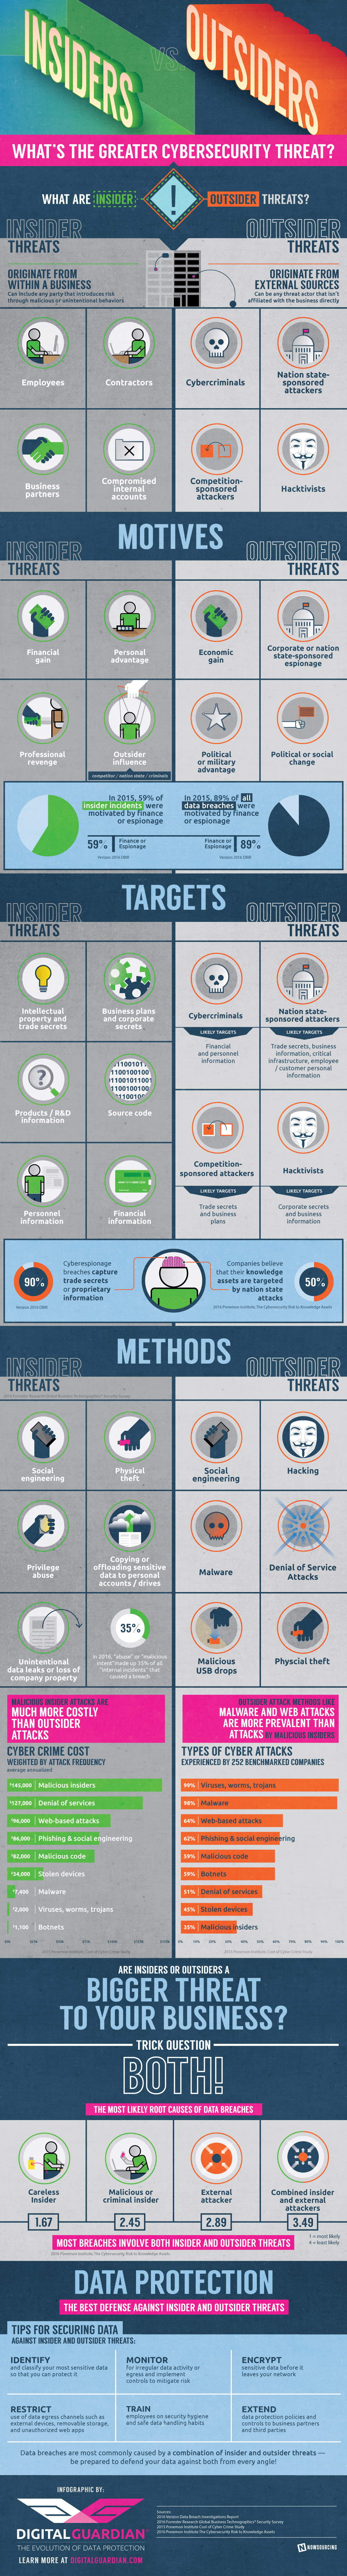 cybersecurity threat cybersecurity threats cybersecurity infographic insiders outsiders